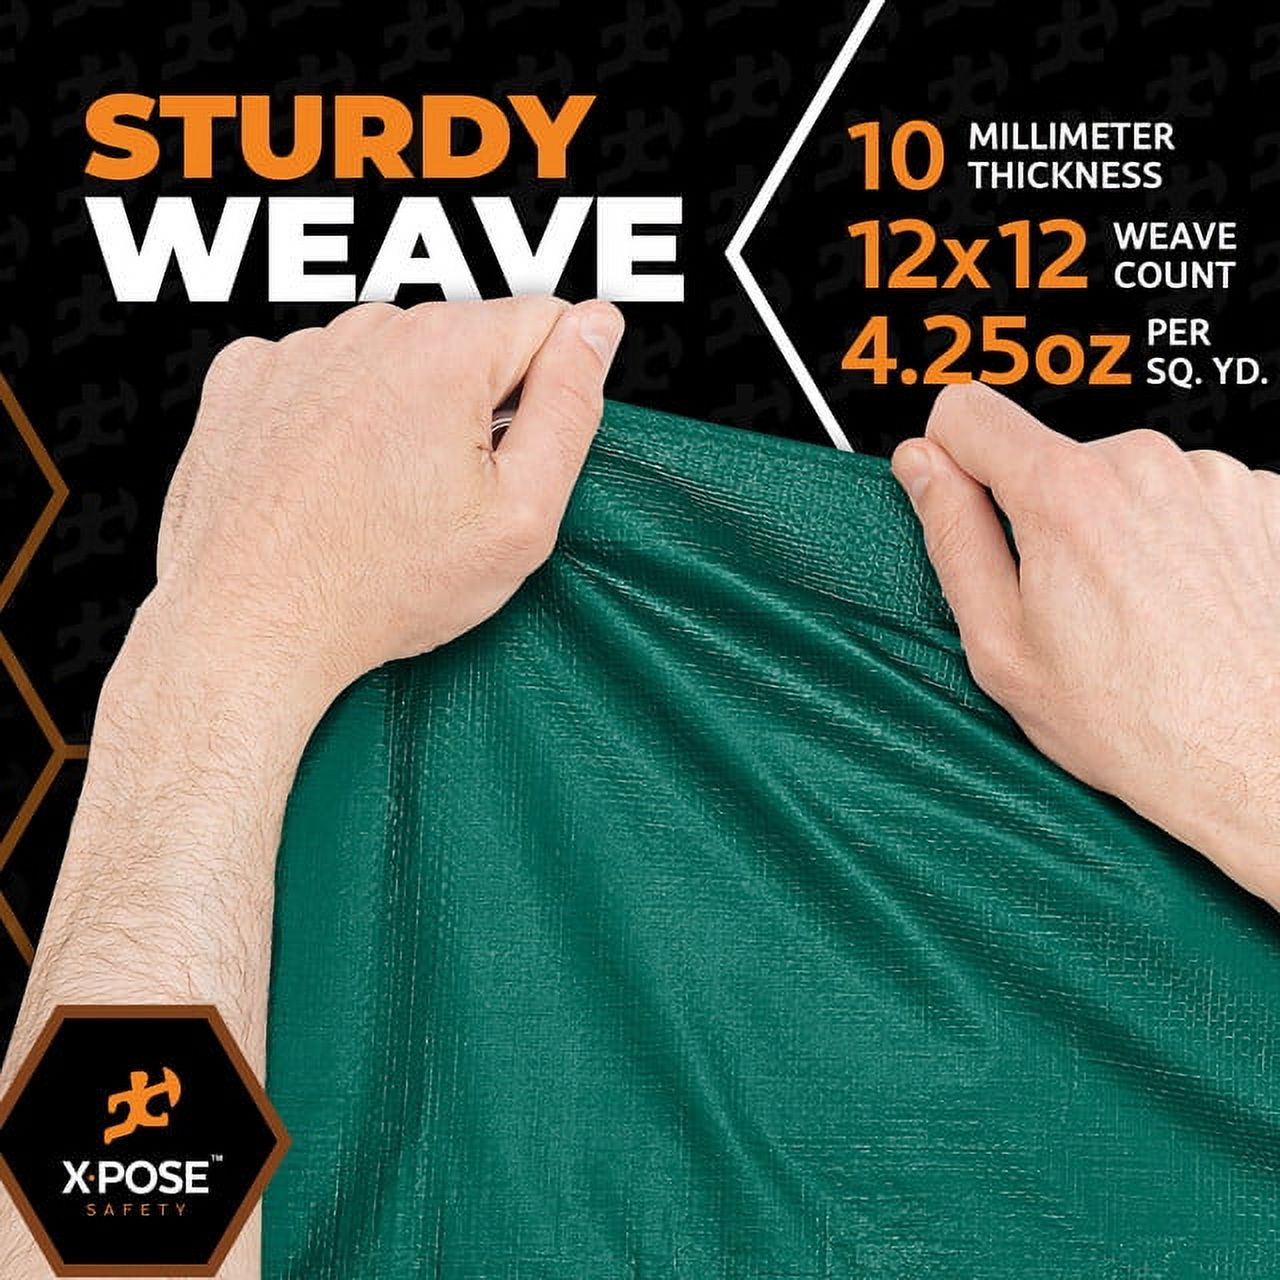 Heavy Duty Poly Tarp 30 Feet x 50 Feet 10 Mil Thick Waterproof, UV Blocking Protective Cover - Reversible Green and Black - Laminated Coating - Rustproof Grommets - by Xpose Safety - image 5 of 8